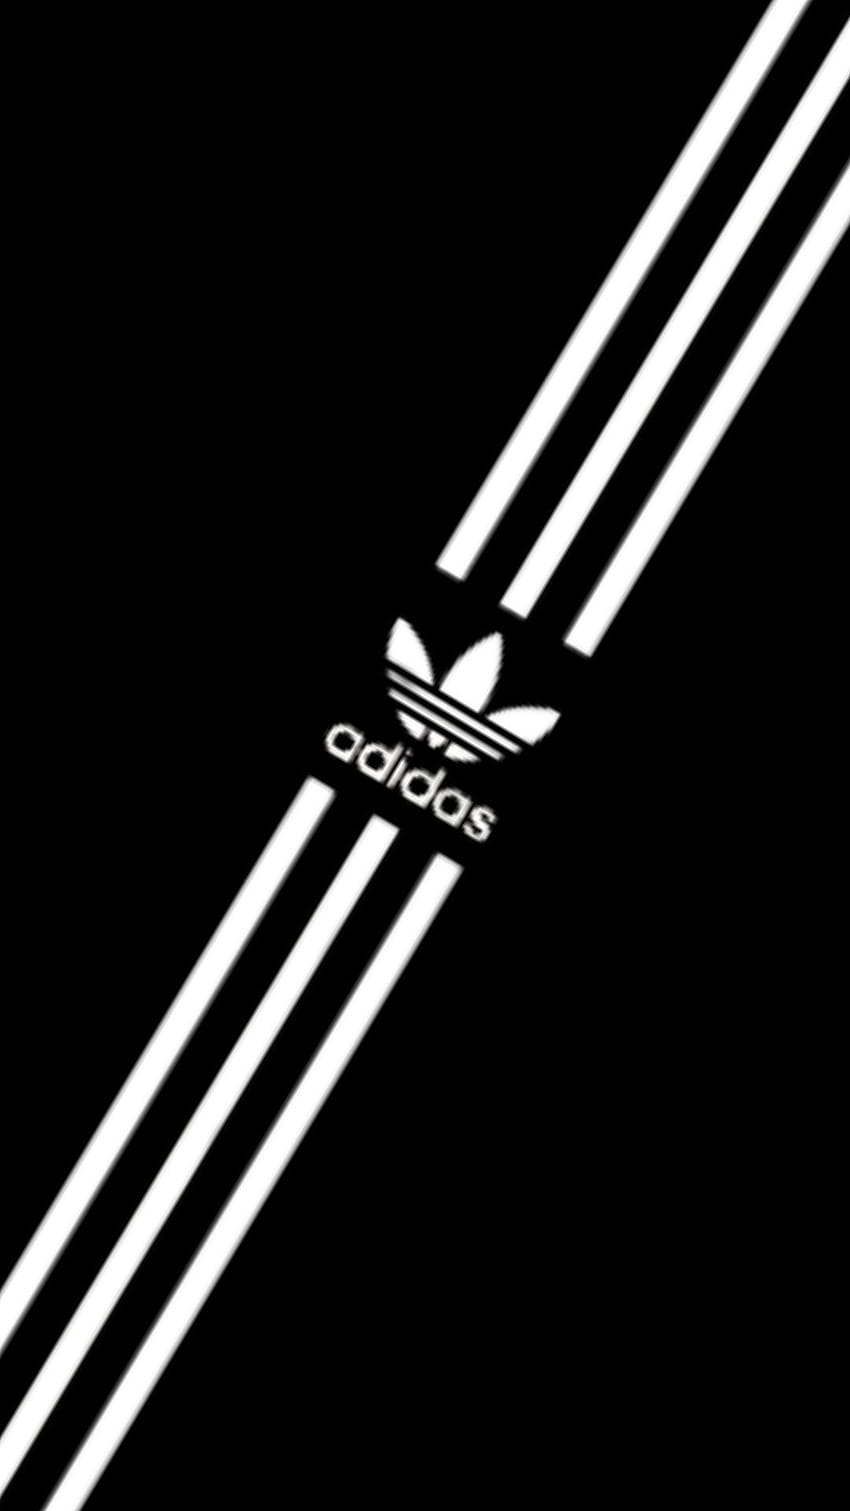 iPhone Wallpapers — iPhone 6 Adidas wallpaper | Adidas wallpapers, Adidas  wallpaper iphone, Adidas logo wallpapers